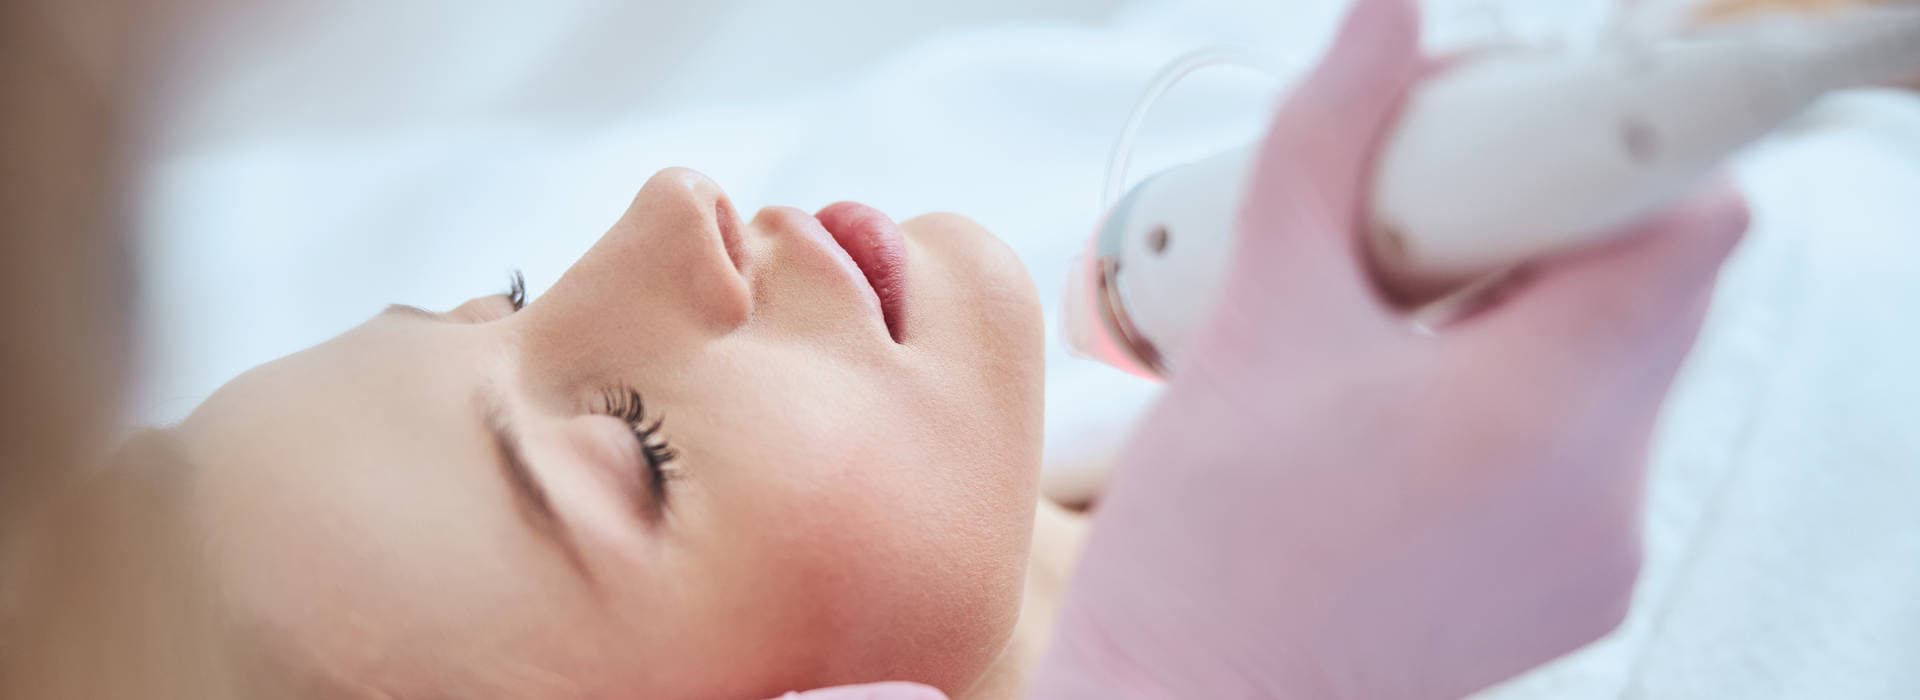 A woman is having Microneedling treatment.